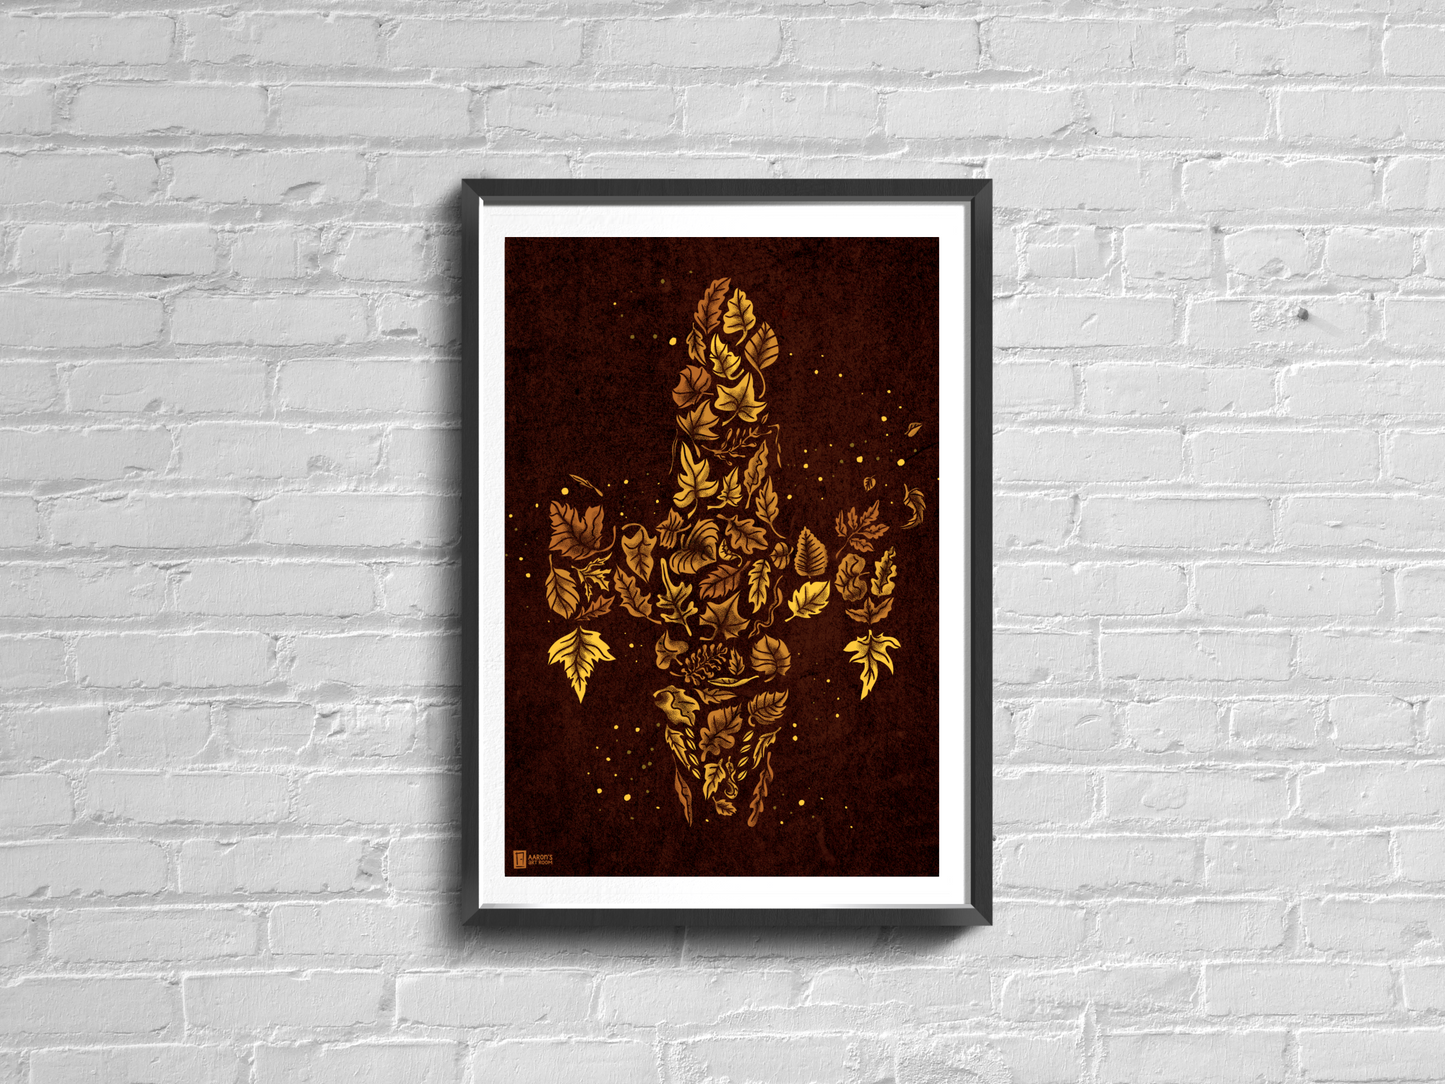 I am a leaf on the wind - Firefly and Serenity - Print